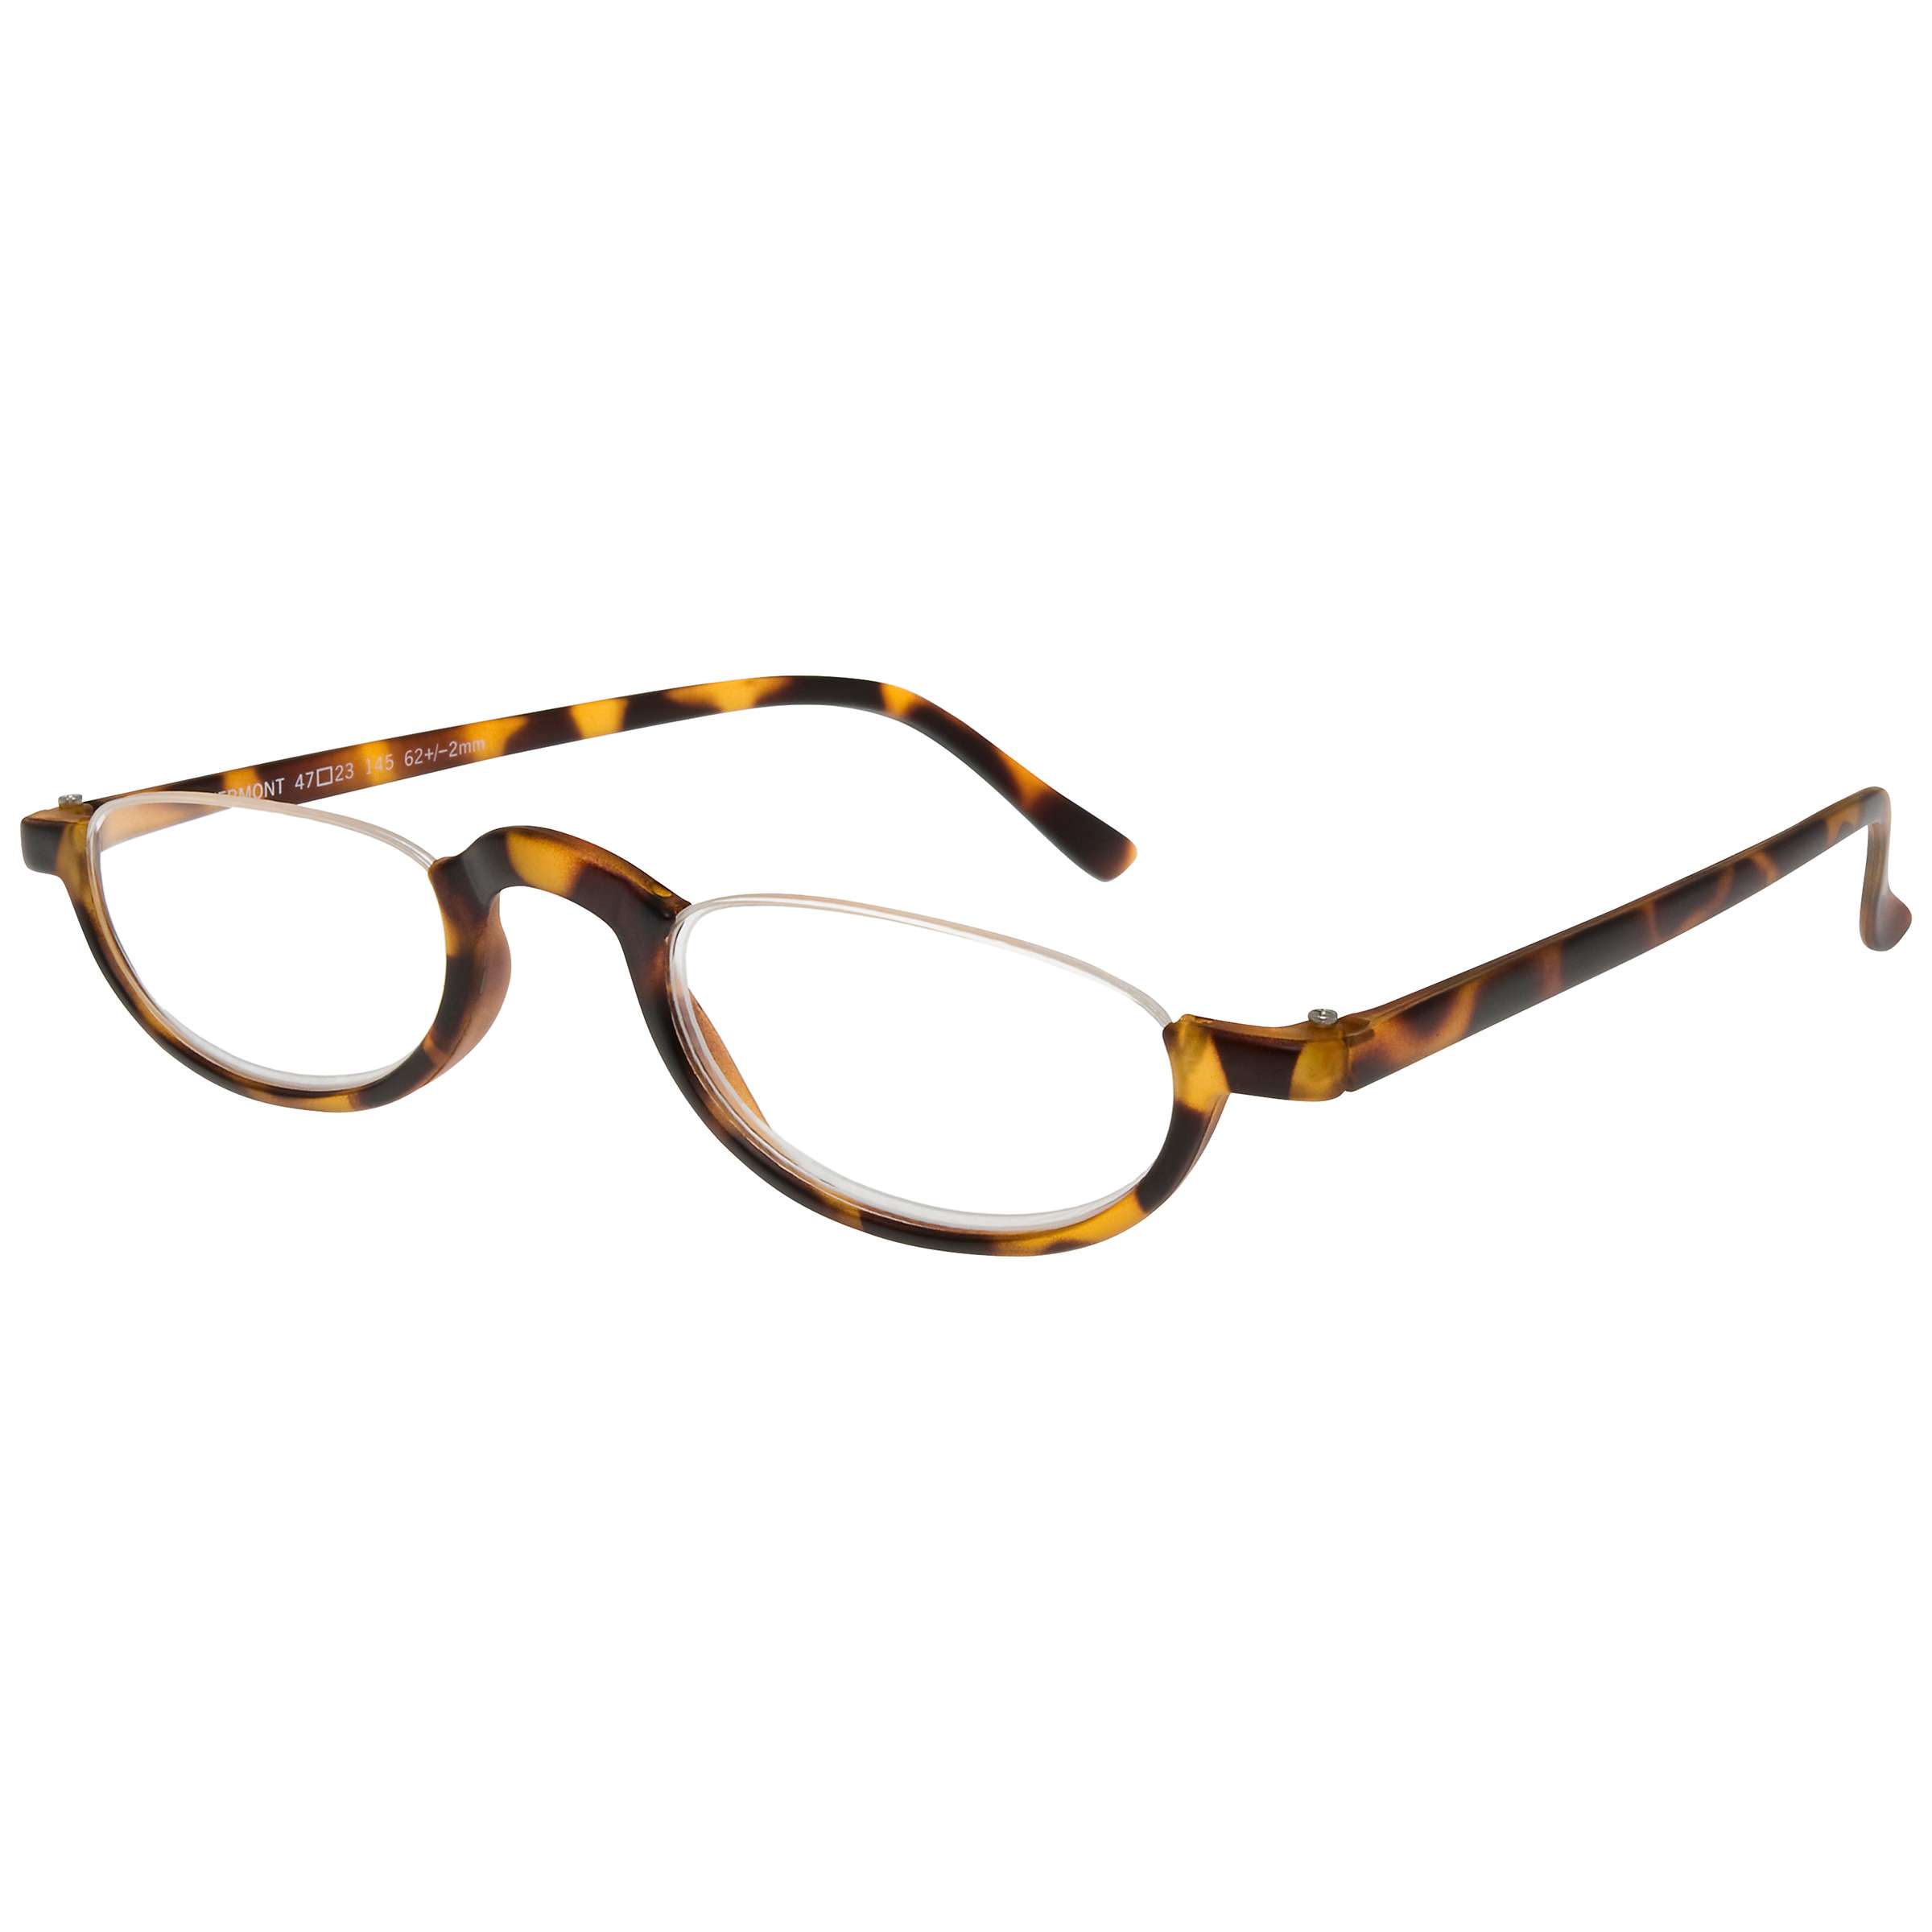 Buy Magnif Eyes Vermont Unisex Average Fit Ready Reader Glasses, Shell Online at johnlewis.com